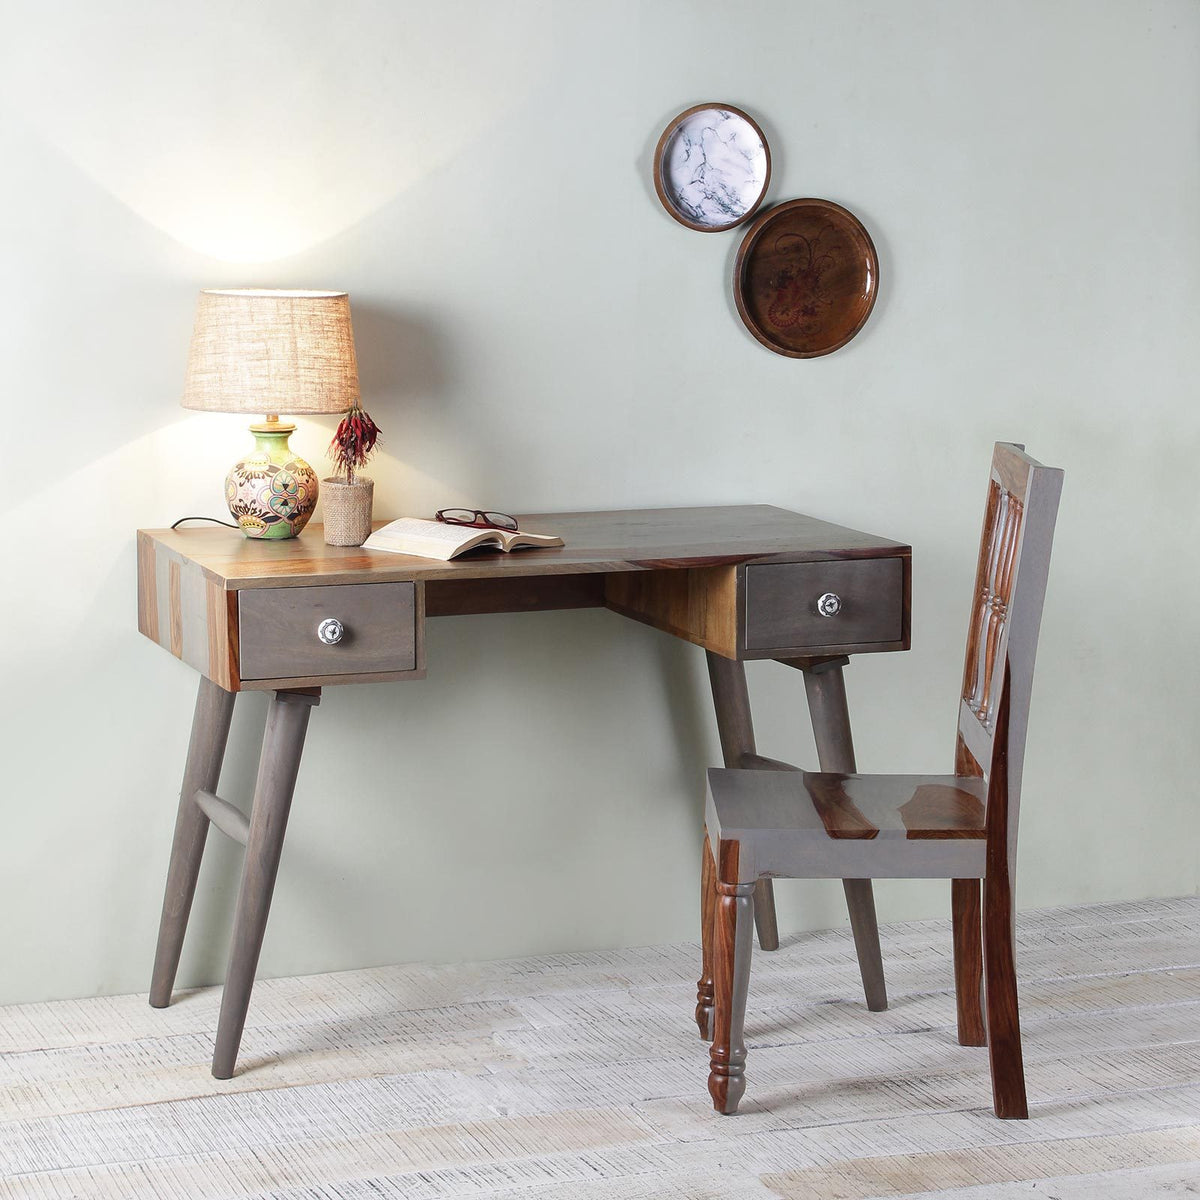 Raoul Solid Wood Study Table with Wooden Chair